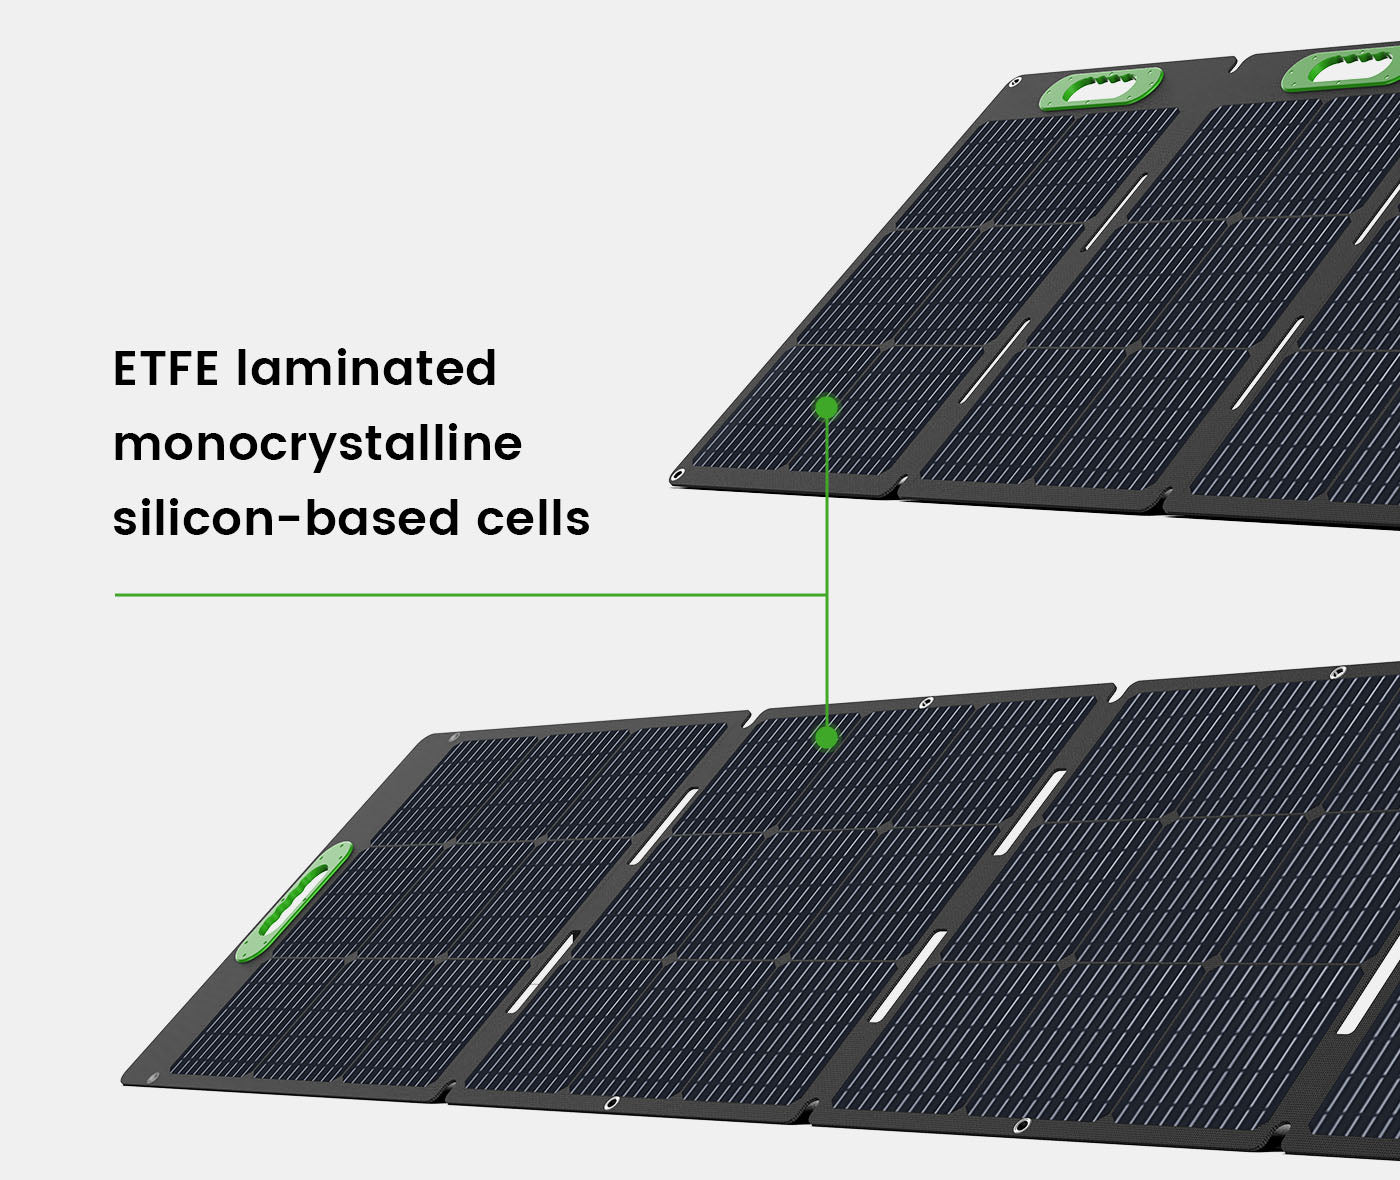 Written text:"ETFE laminated monocrystalline silicon-based cells" and a 100 Watts SP100 Solar Panel image and a 200 Watts SP200 Solar Panel image